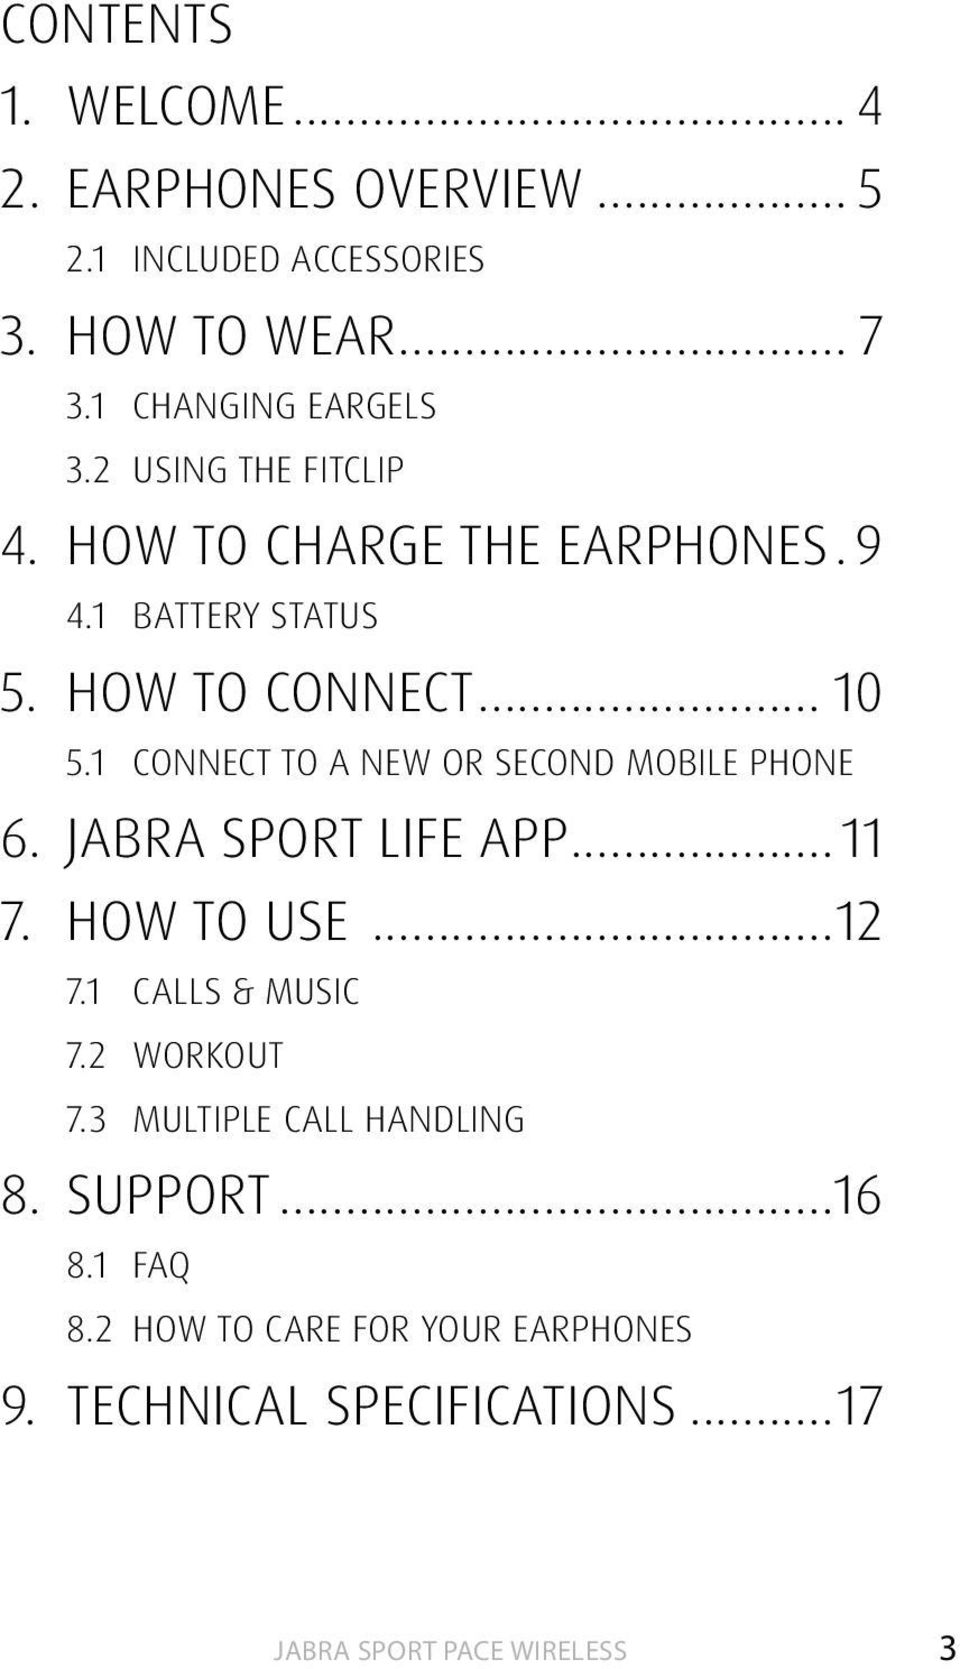 .. 10 5.1 CONNECT TO A NEW OR SECOND MOBILE PHONE 6. JABRA SPORT LIFE APP...11 7. HOW TO USE...12 7.